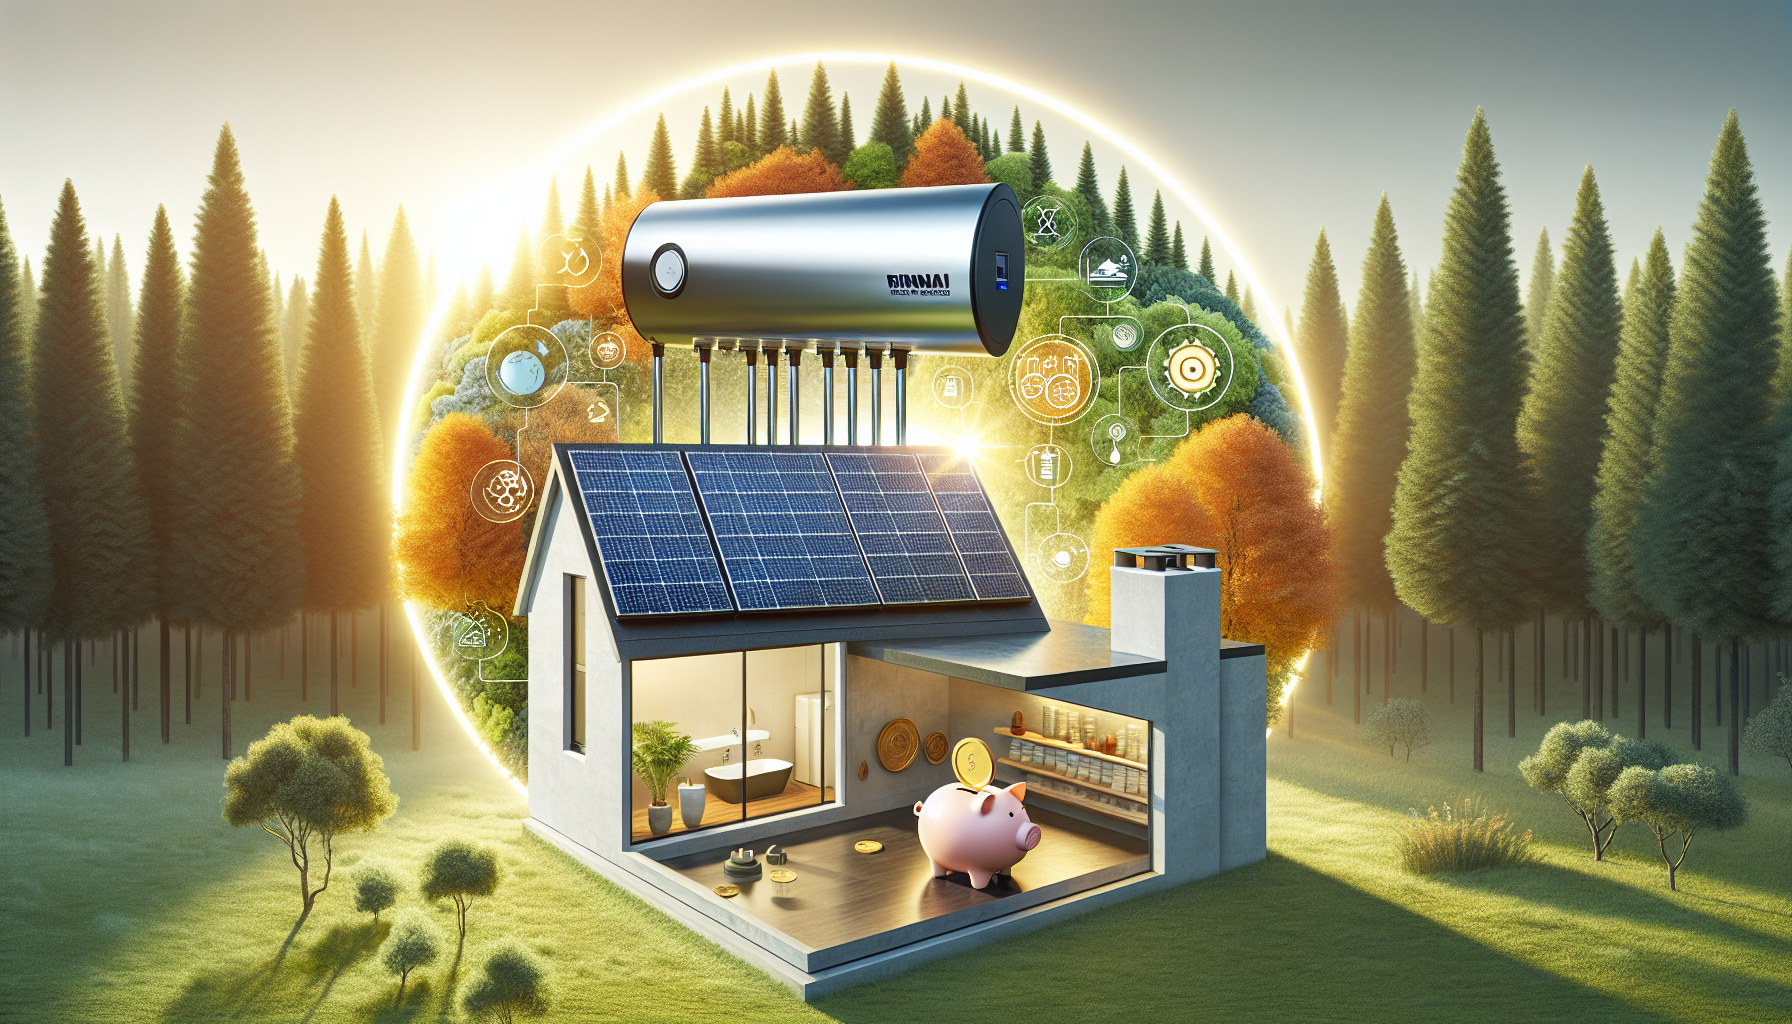 Rinnai solar hot water systems harnessing renewable energy